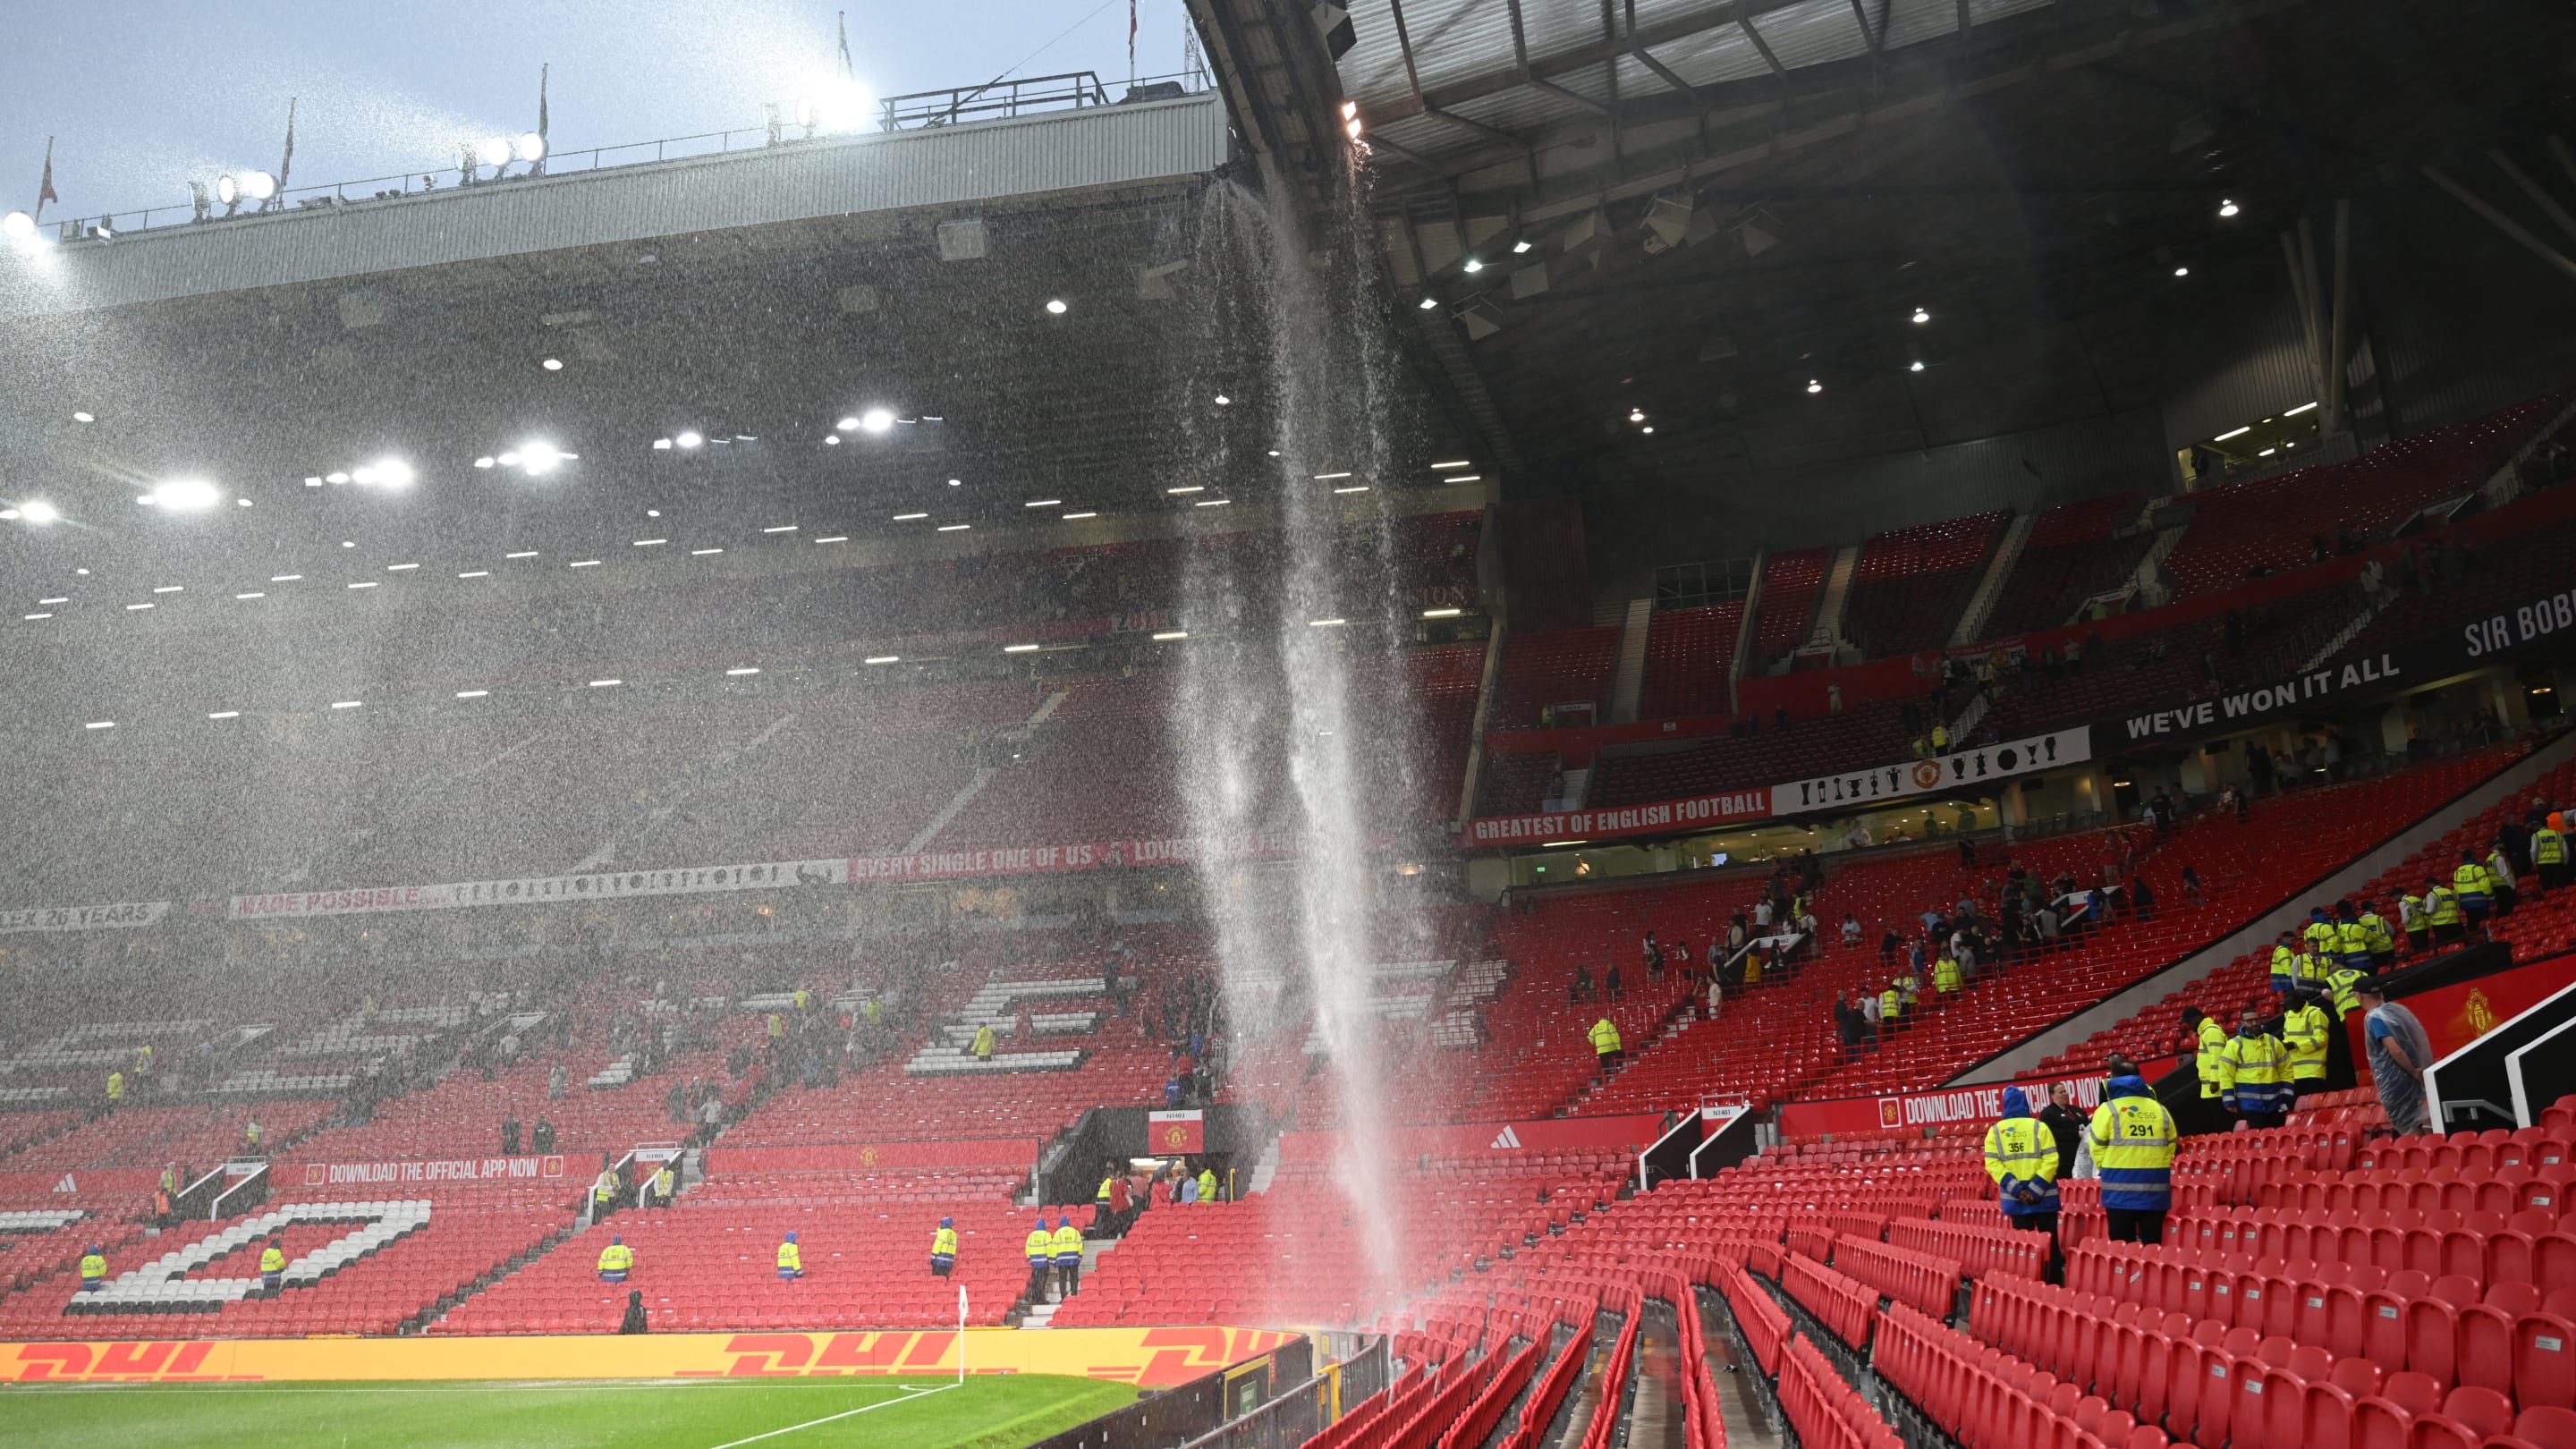 'The Old Trafford waterfall' - How the world reacted to Man Utd's terribly leaky roof